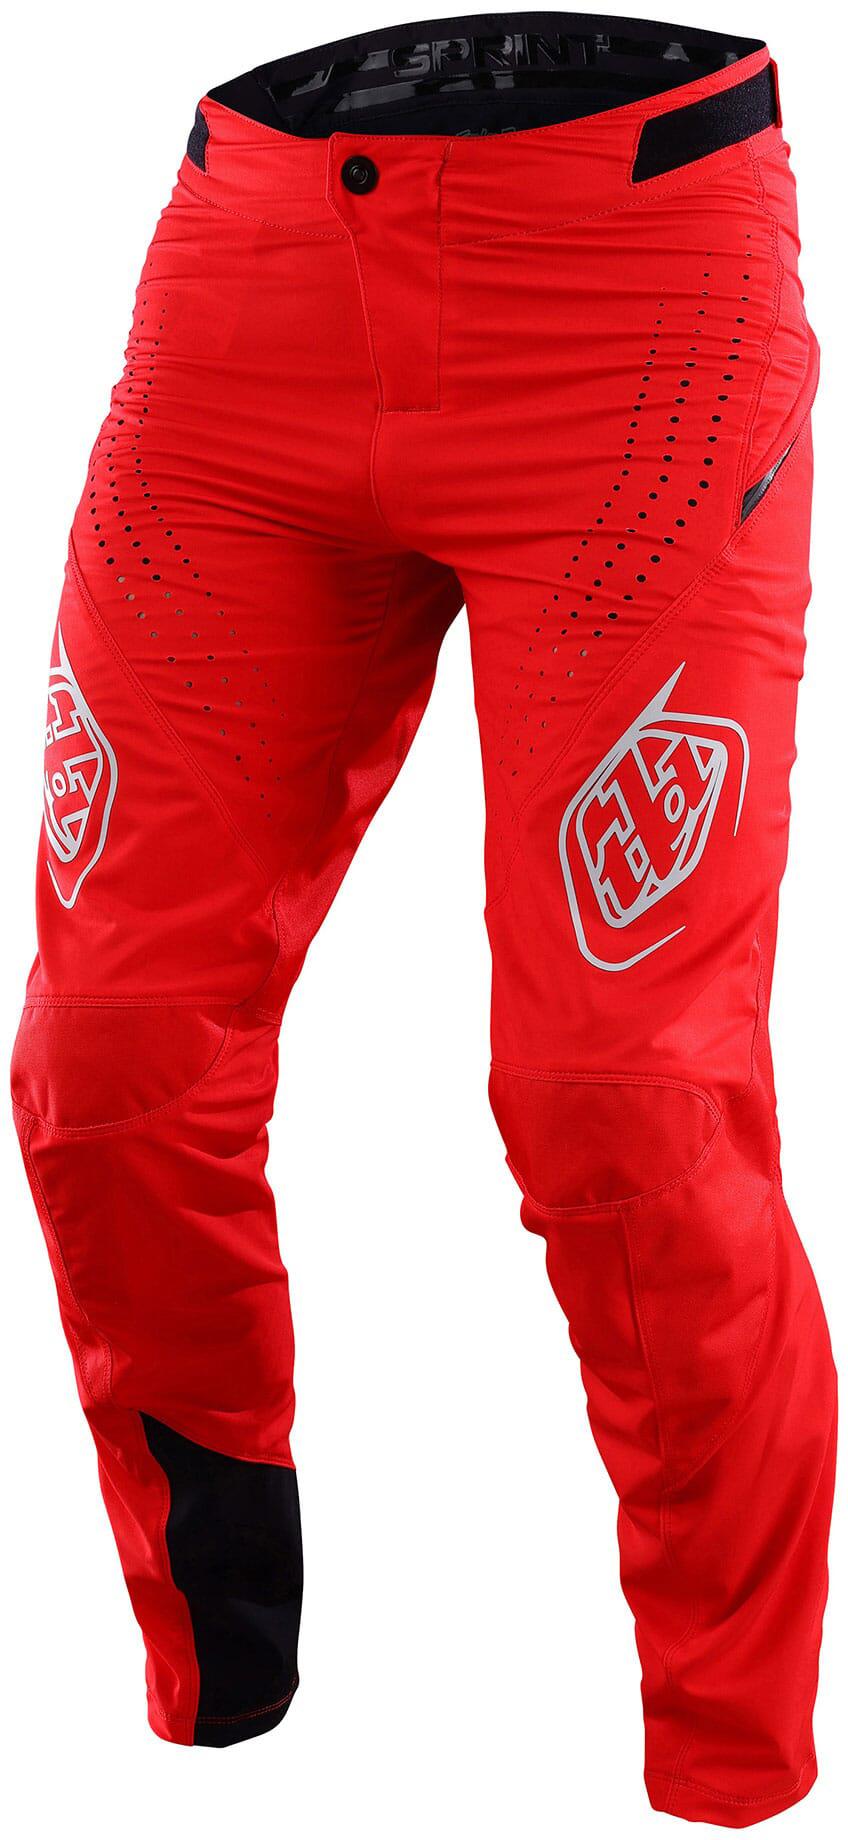 Troy Lee Designs Sprint Pant - Mono Race Red